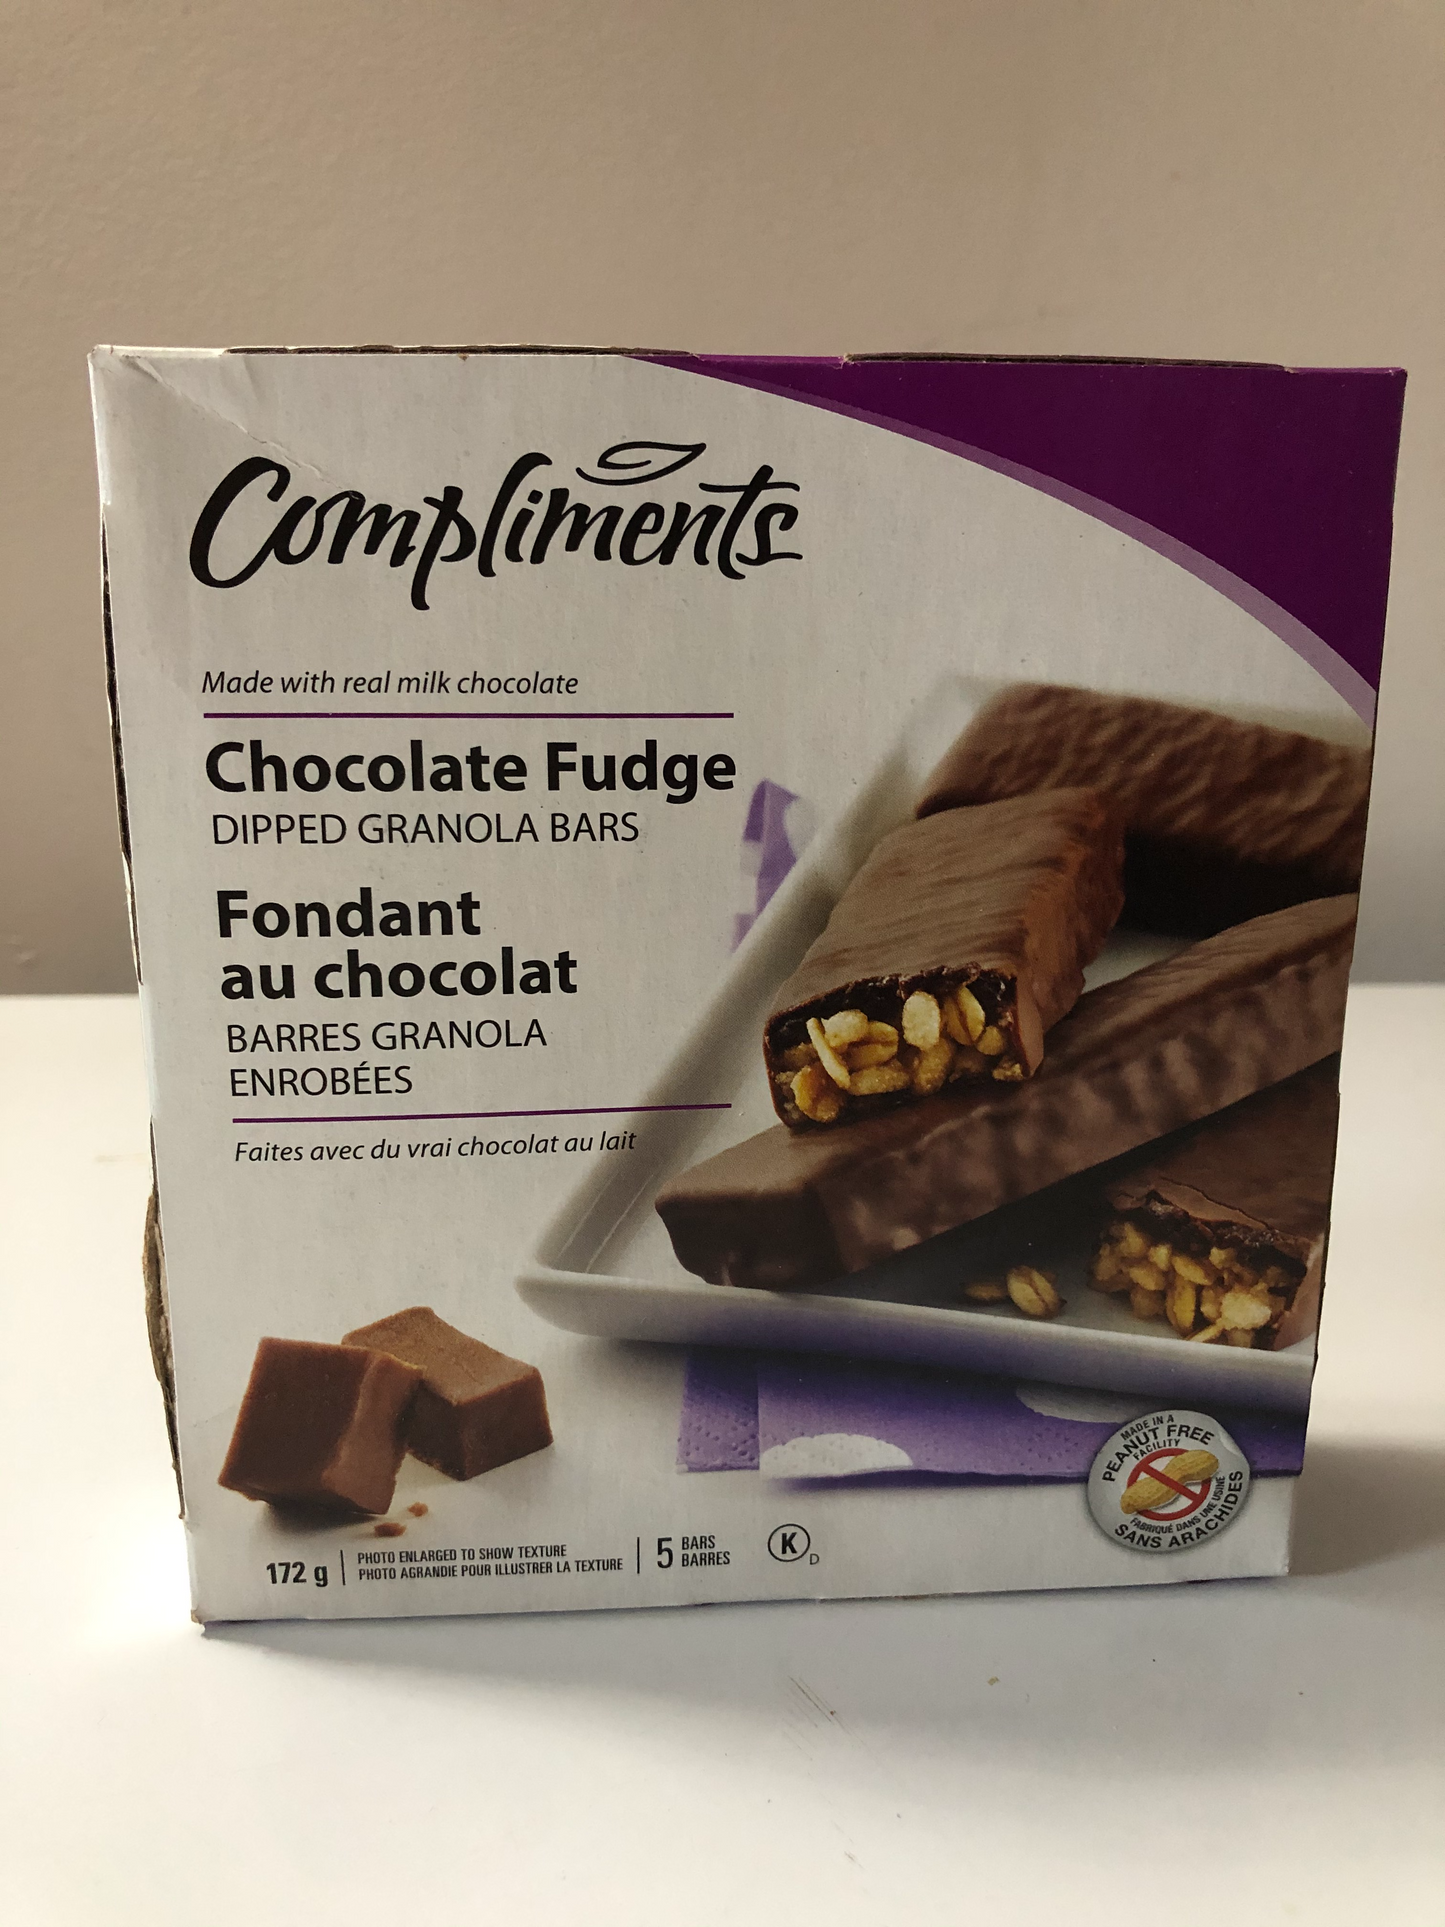 Compliments Chocolate Fudge Dipped Granola Bars 172 g